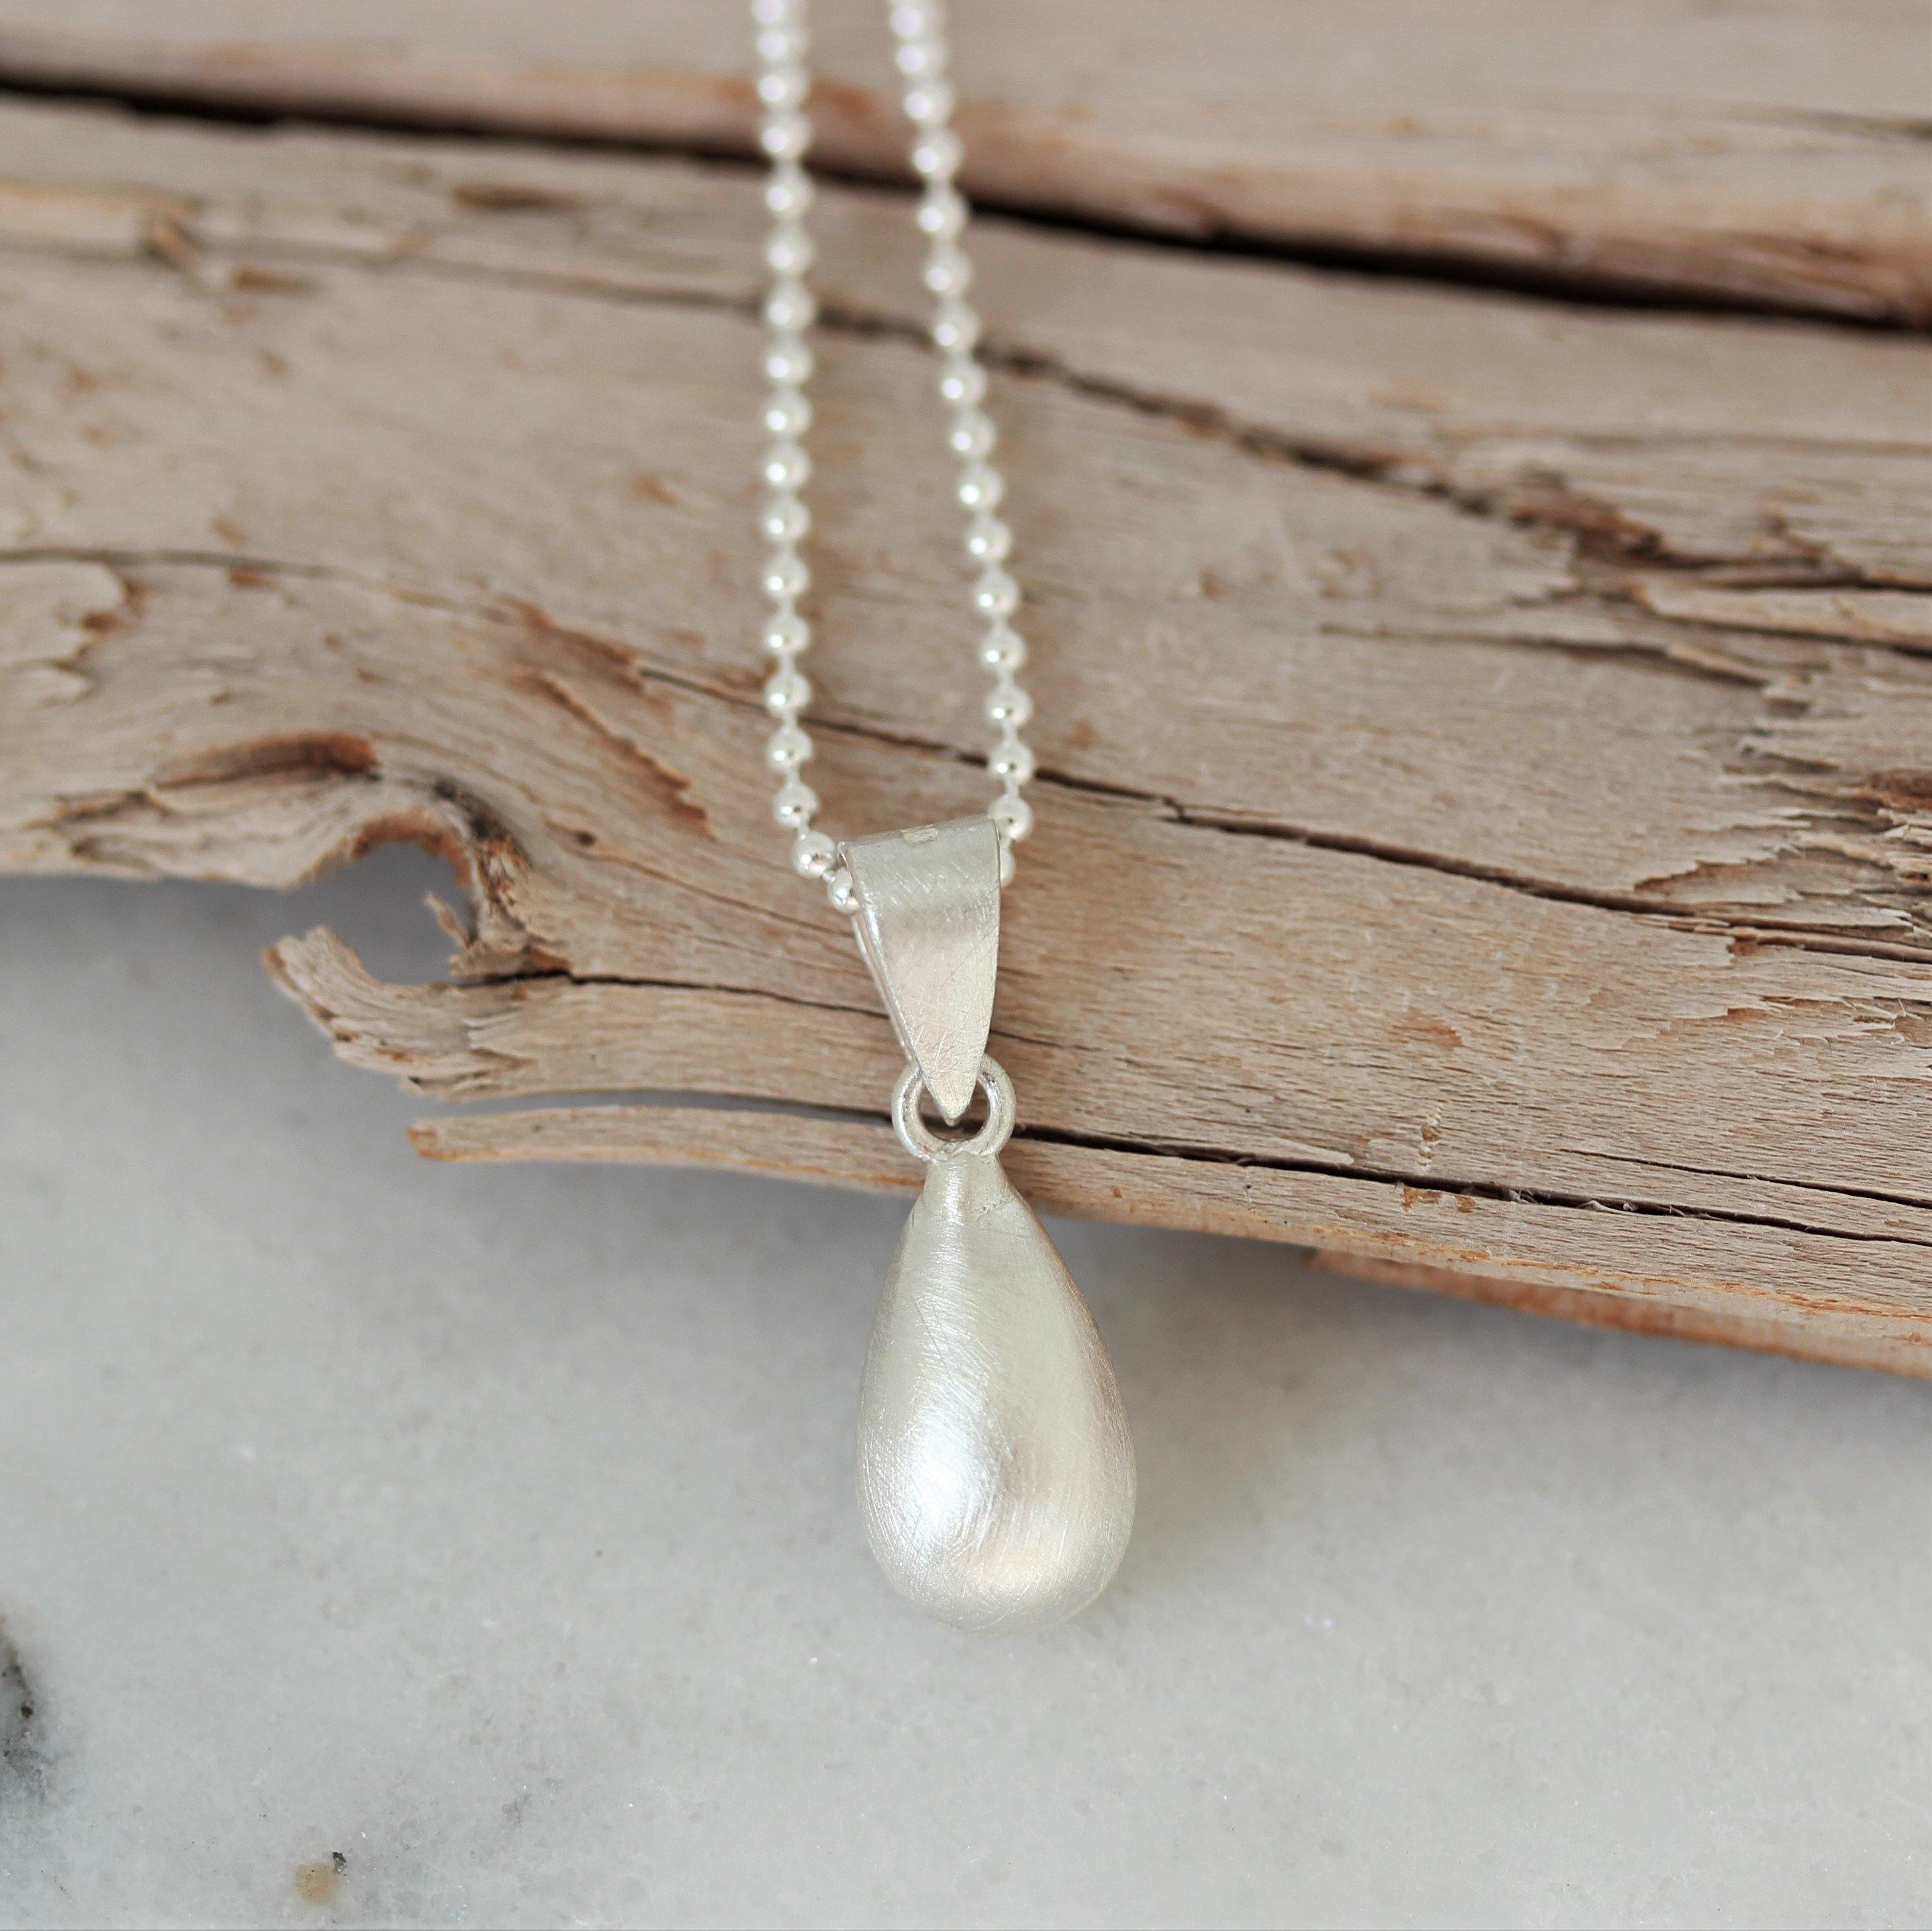 Sterling Silver Matte, Textured Teardrop Pendant & Ball Chain Necklace - STERLING SILVER DESIGNS